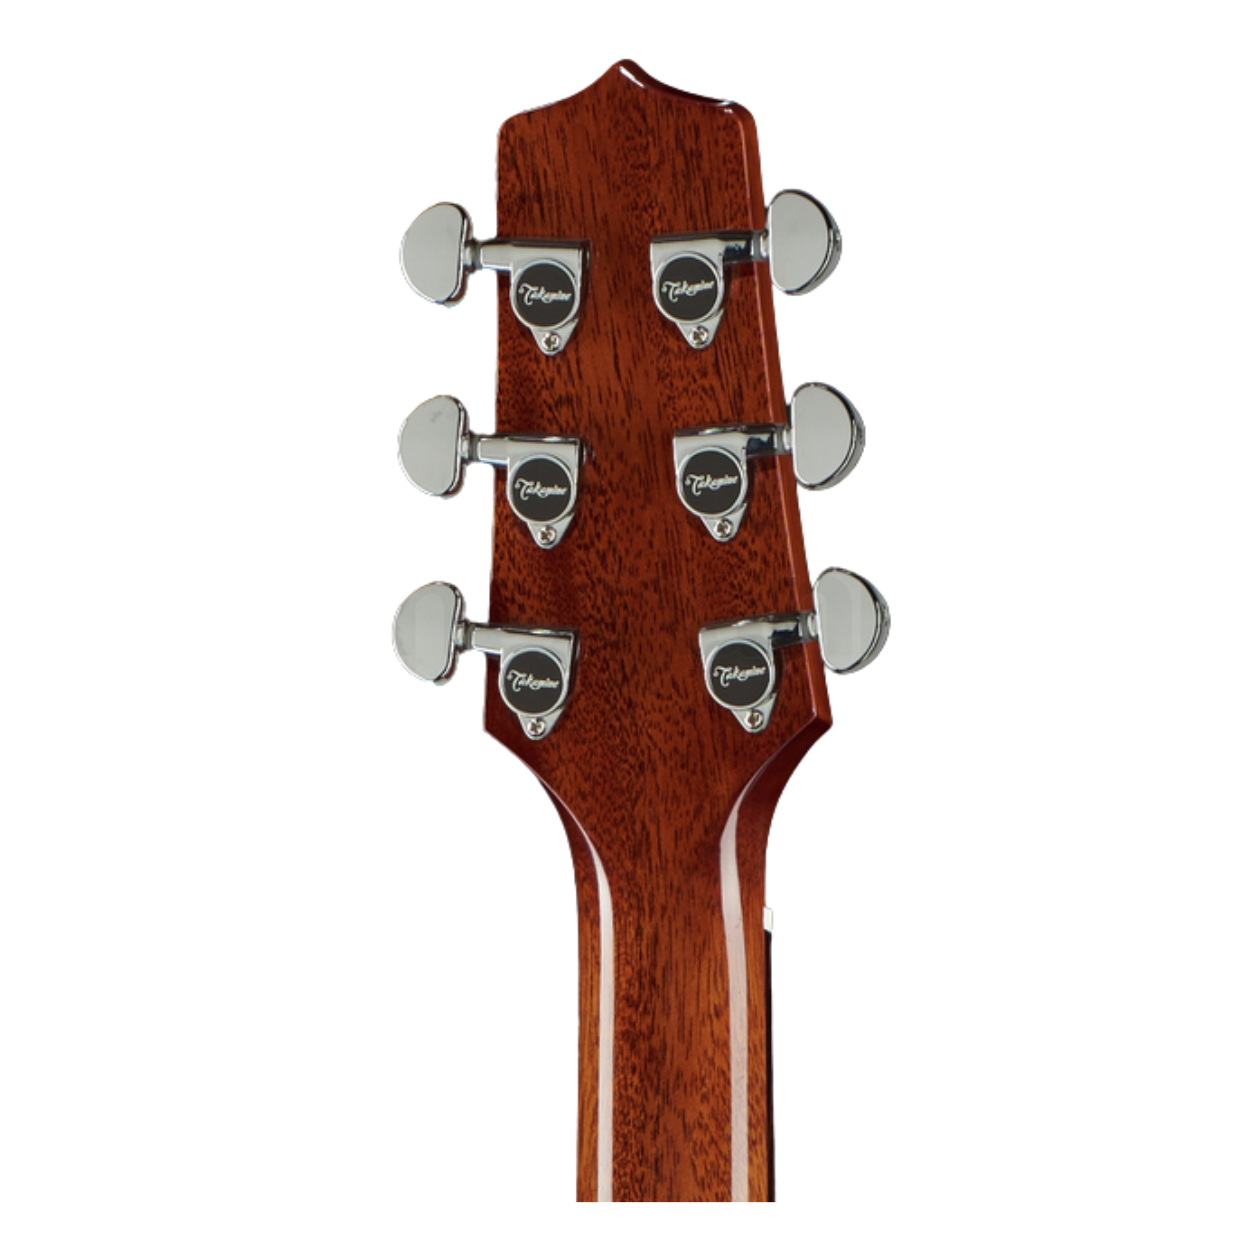 TAKAMINE PRO SERIES EF261S AN FXC BODY CUTAWAY SOLID CEDAR TOP ACOUSTIC-ELECTRIC WITH CT-4BII PREAMP & HARD CASE